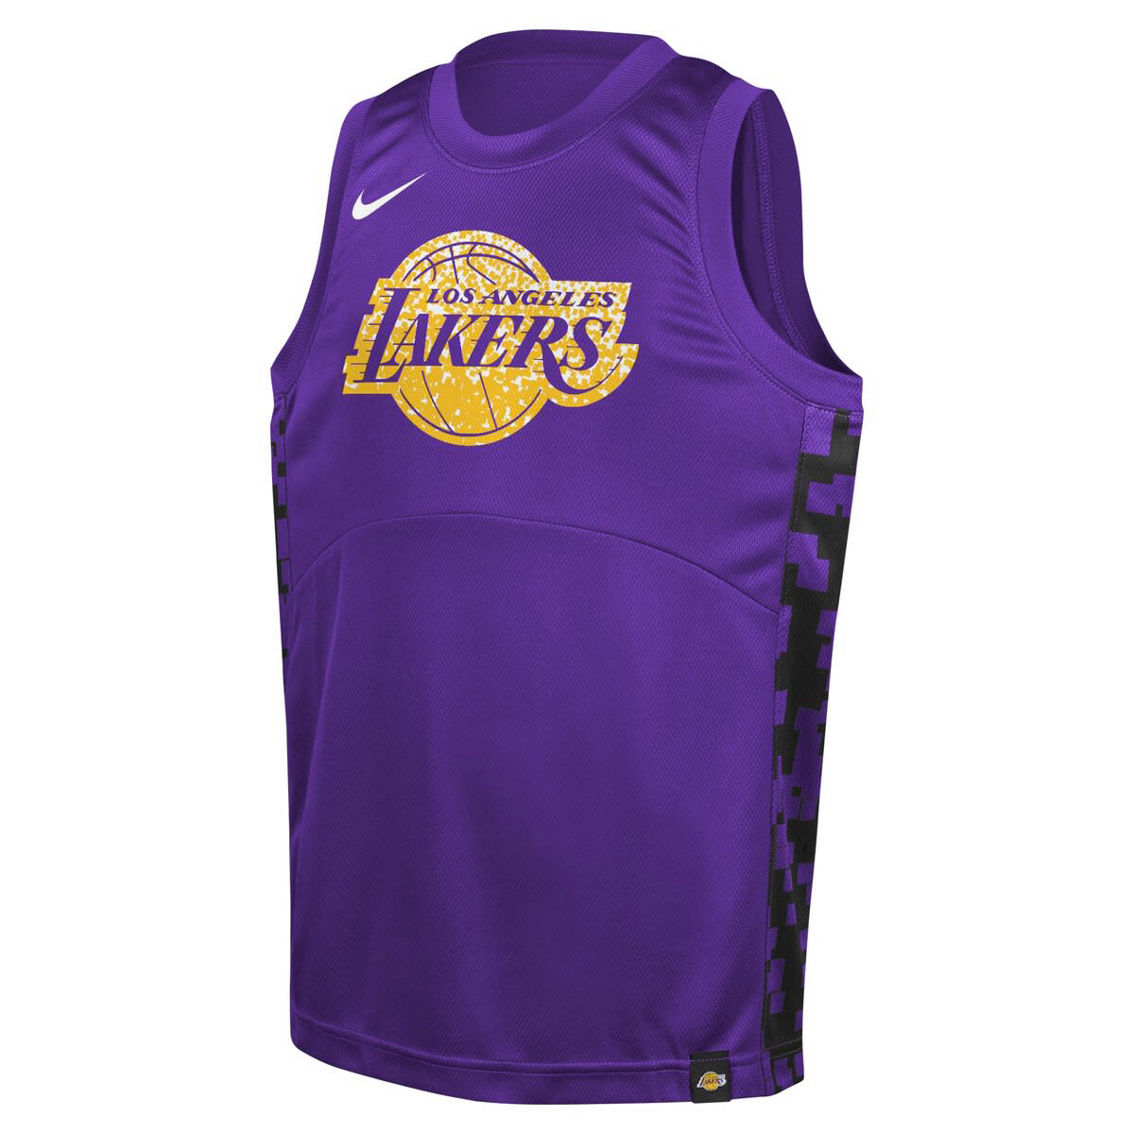 Nike Youth Purple Los Angeles Lakers Courtside Starting Five Team Jersey - Image 3 of 4